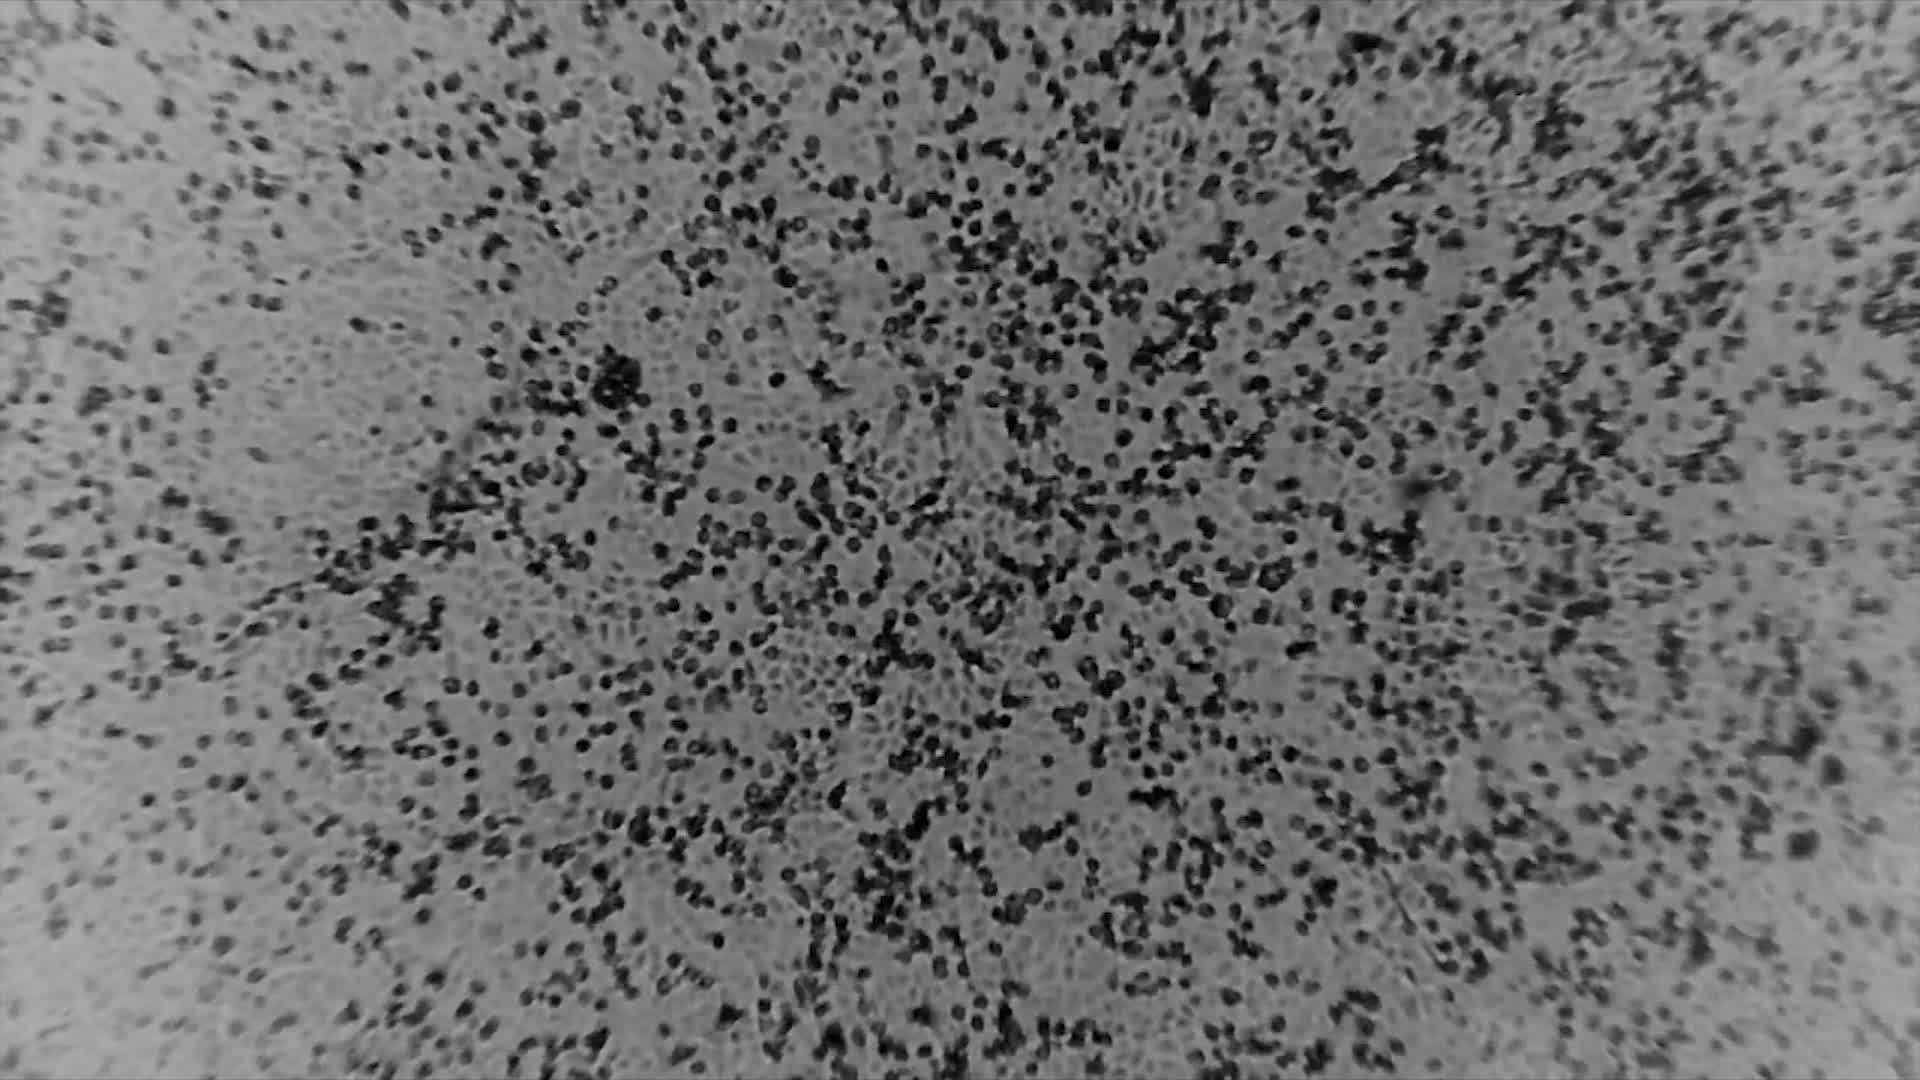 A screengrab from a video shows the novel coronavirus in microscopic view. Doherty Institute, University of Melbourne